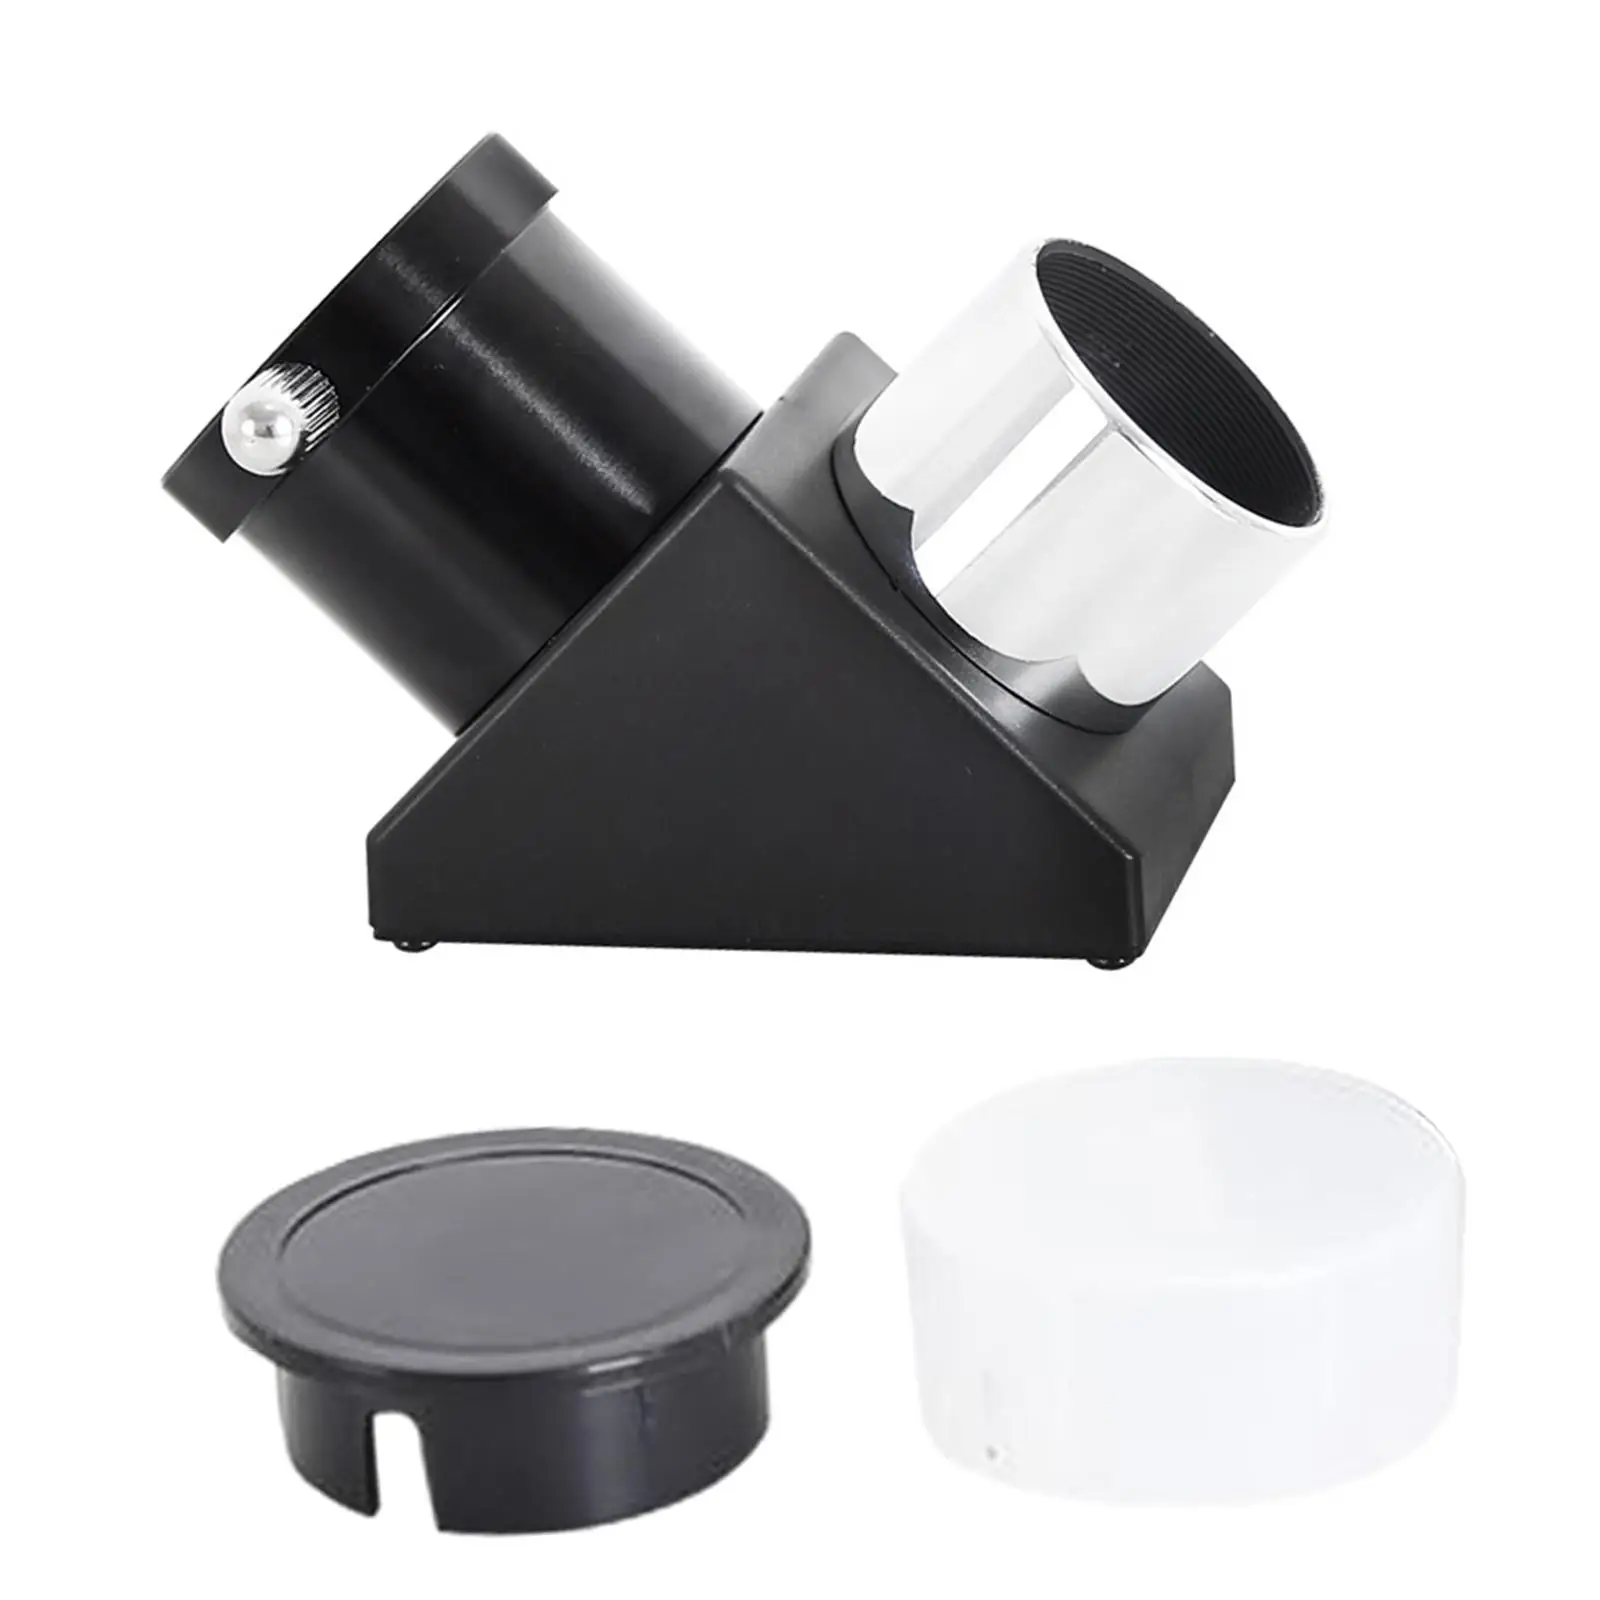 Zeniths Mirror Astronomical Telescope Accessories for Astronomical Visual Astrophotography Universal Replacement Easy to Install